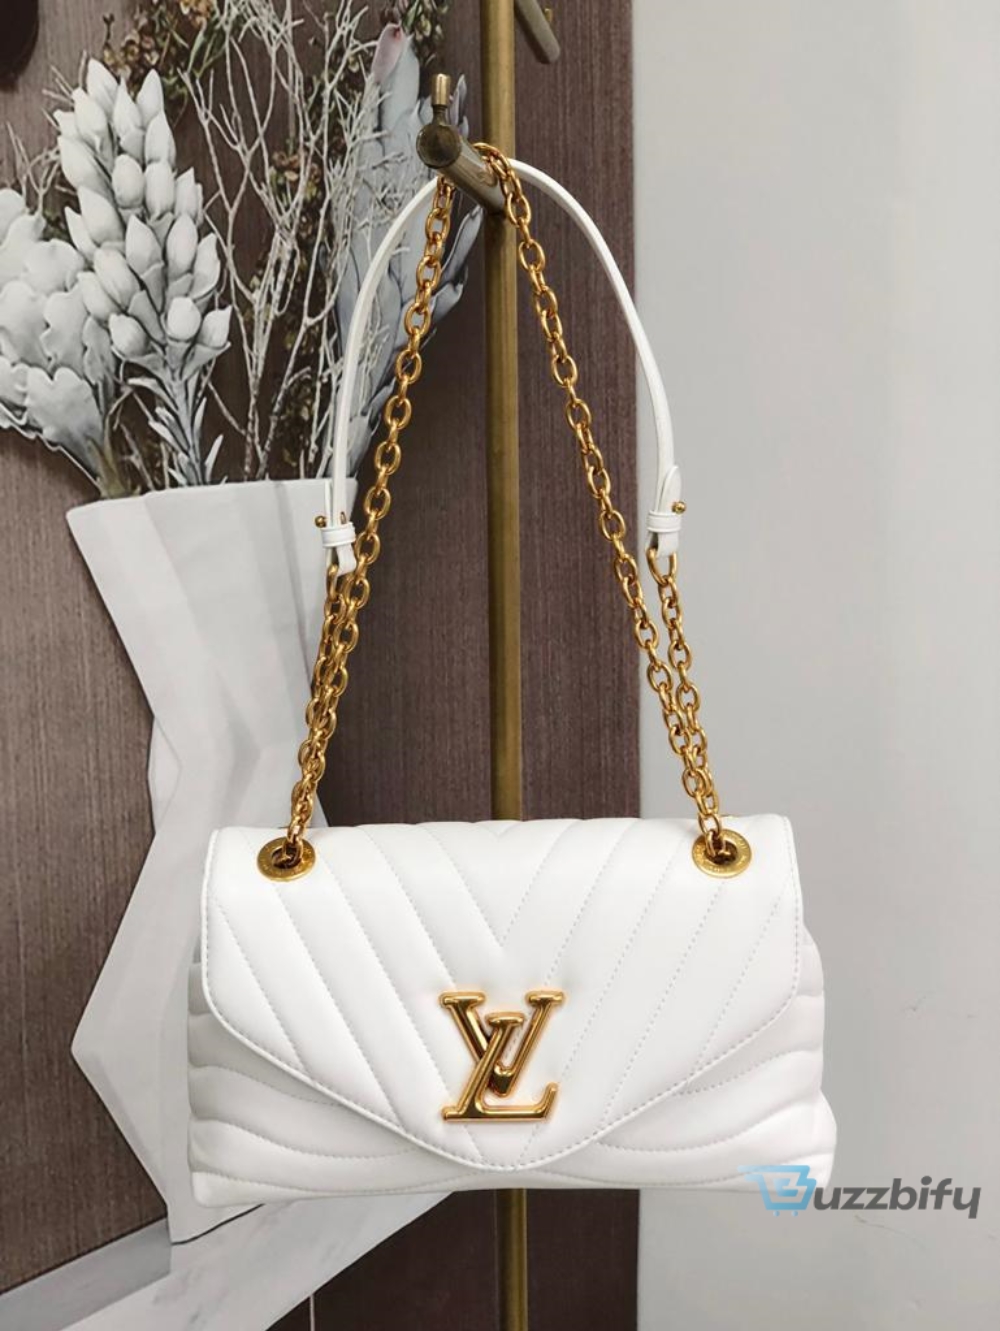 louis vuitton new wave chain bag white for women womens handbags shoulder and crossbody bags 94in24cm lv m58549 2799 buzzbify 1 20